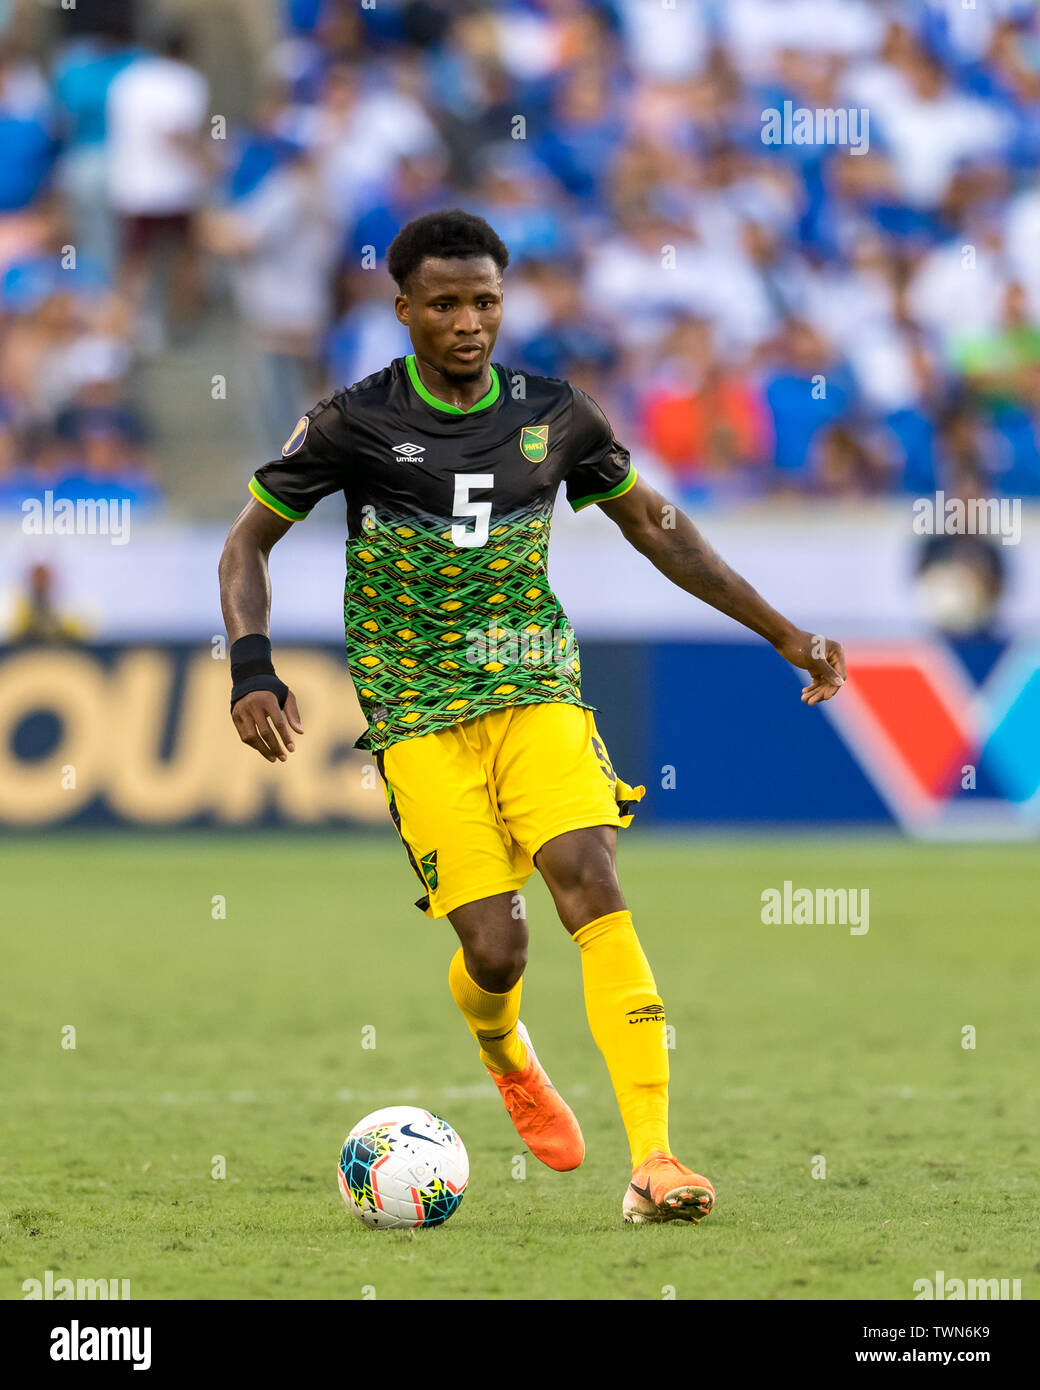 June 21, 2019 : Jamaica defender Elvis Powell (5) during a Concacaf Gold Cup group c match between El Salvador and Jamaica at BBVA Stadium in Houston, Texas. The final ended in a tie 0-0. Maria Lysaker/CSM Stock Photo